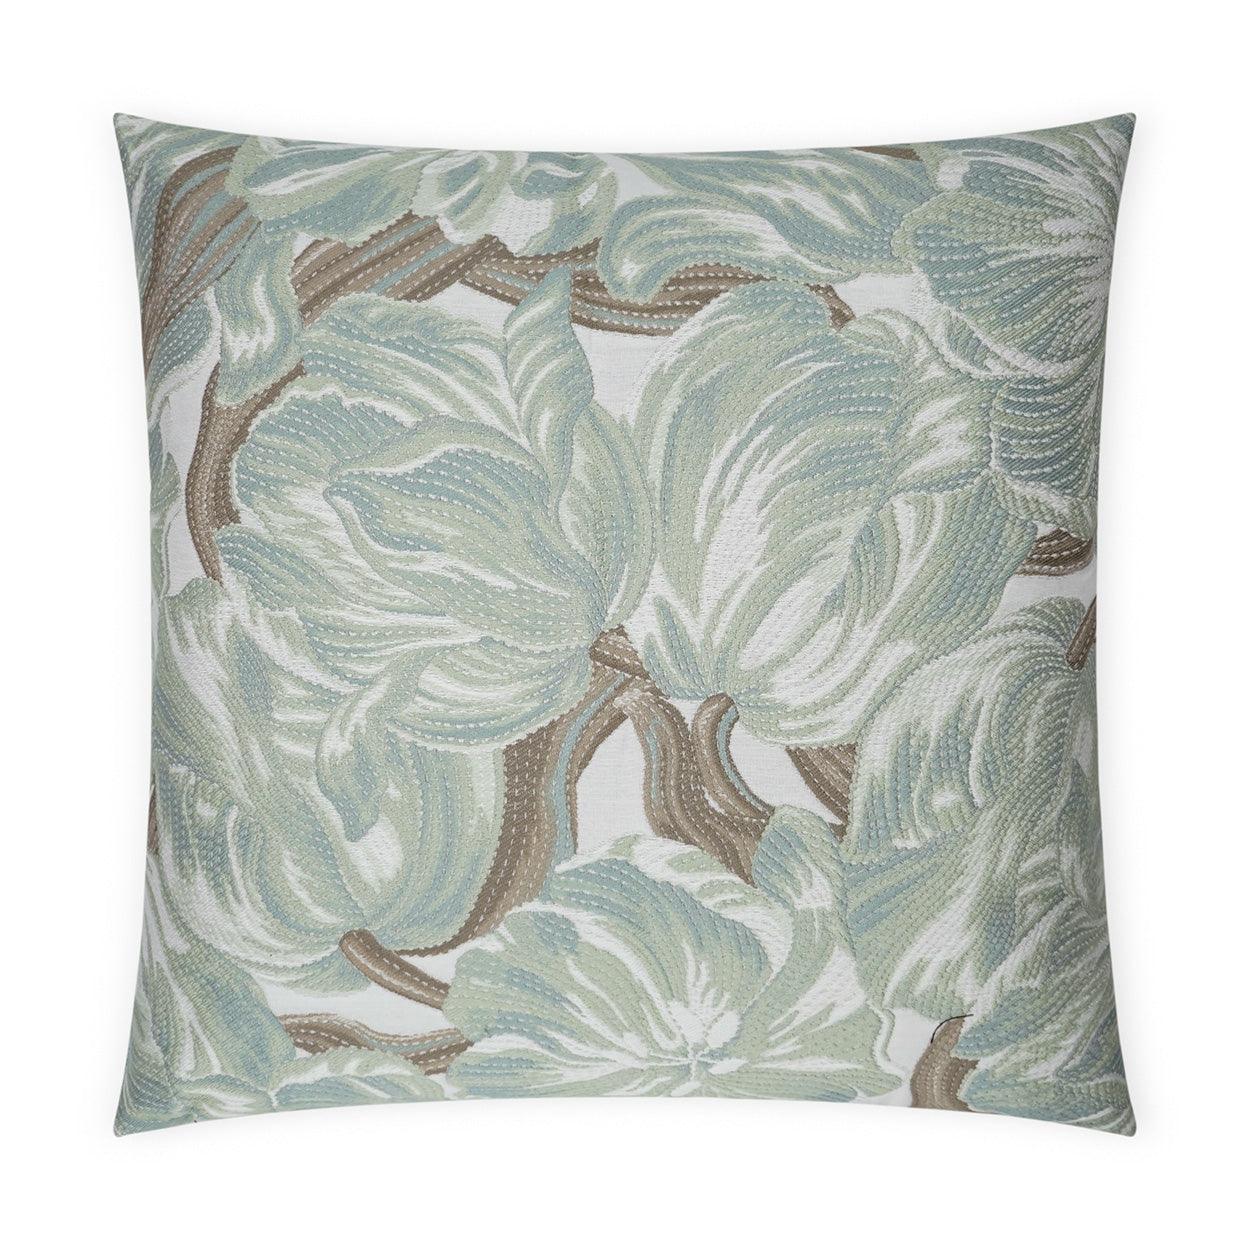 Belle Ame Spearmint Floral Mist Large Throw Pillow With Insert - Uptown Sebastian